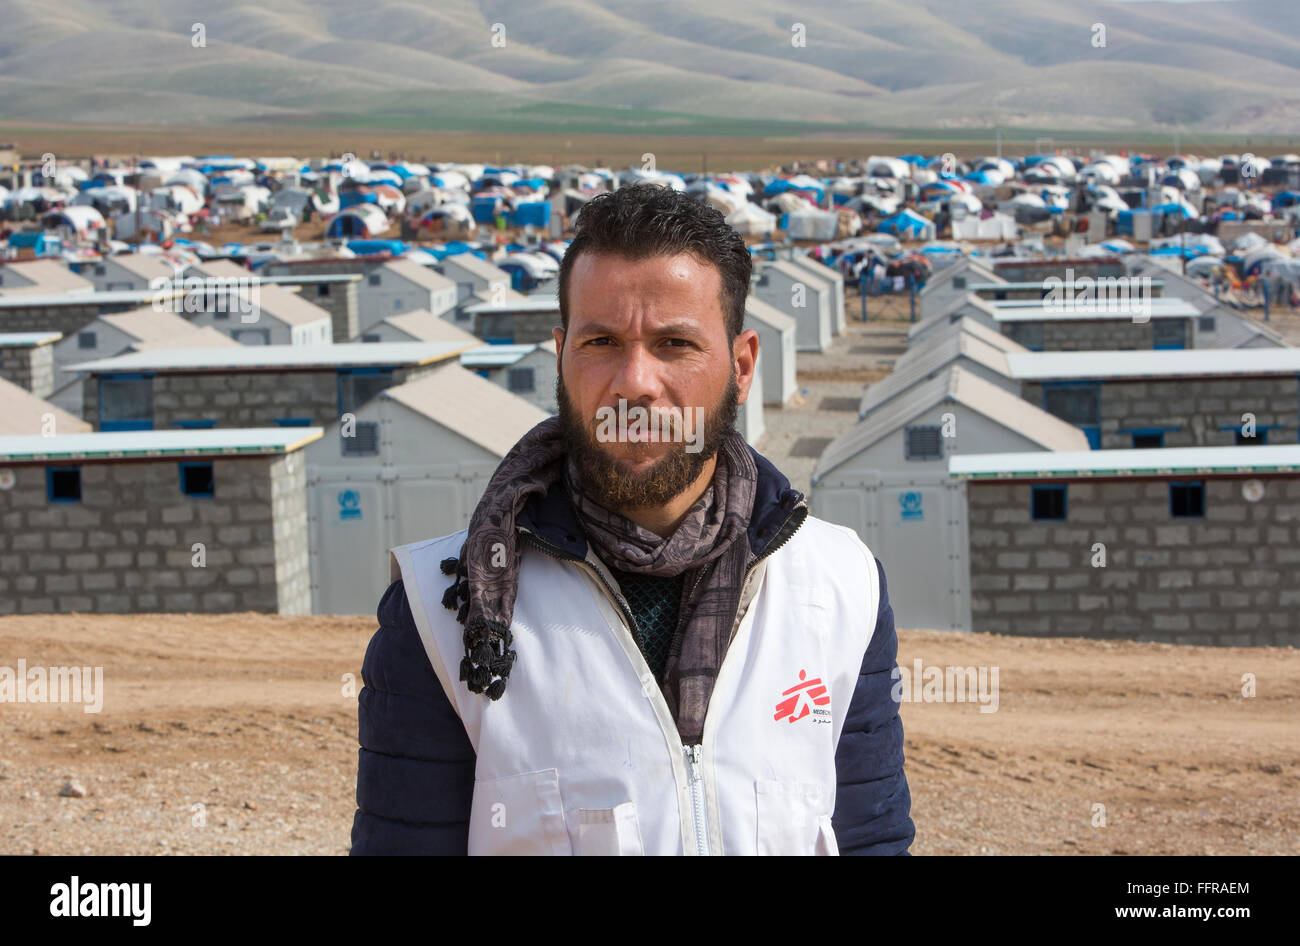 MSF Health promoters at work in Arbat refugee kamp, Northern Iraq Stock Photo